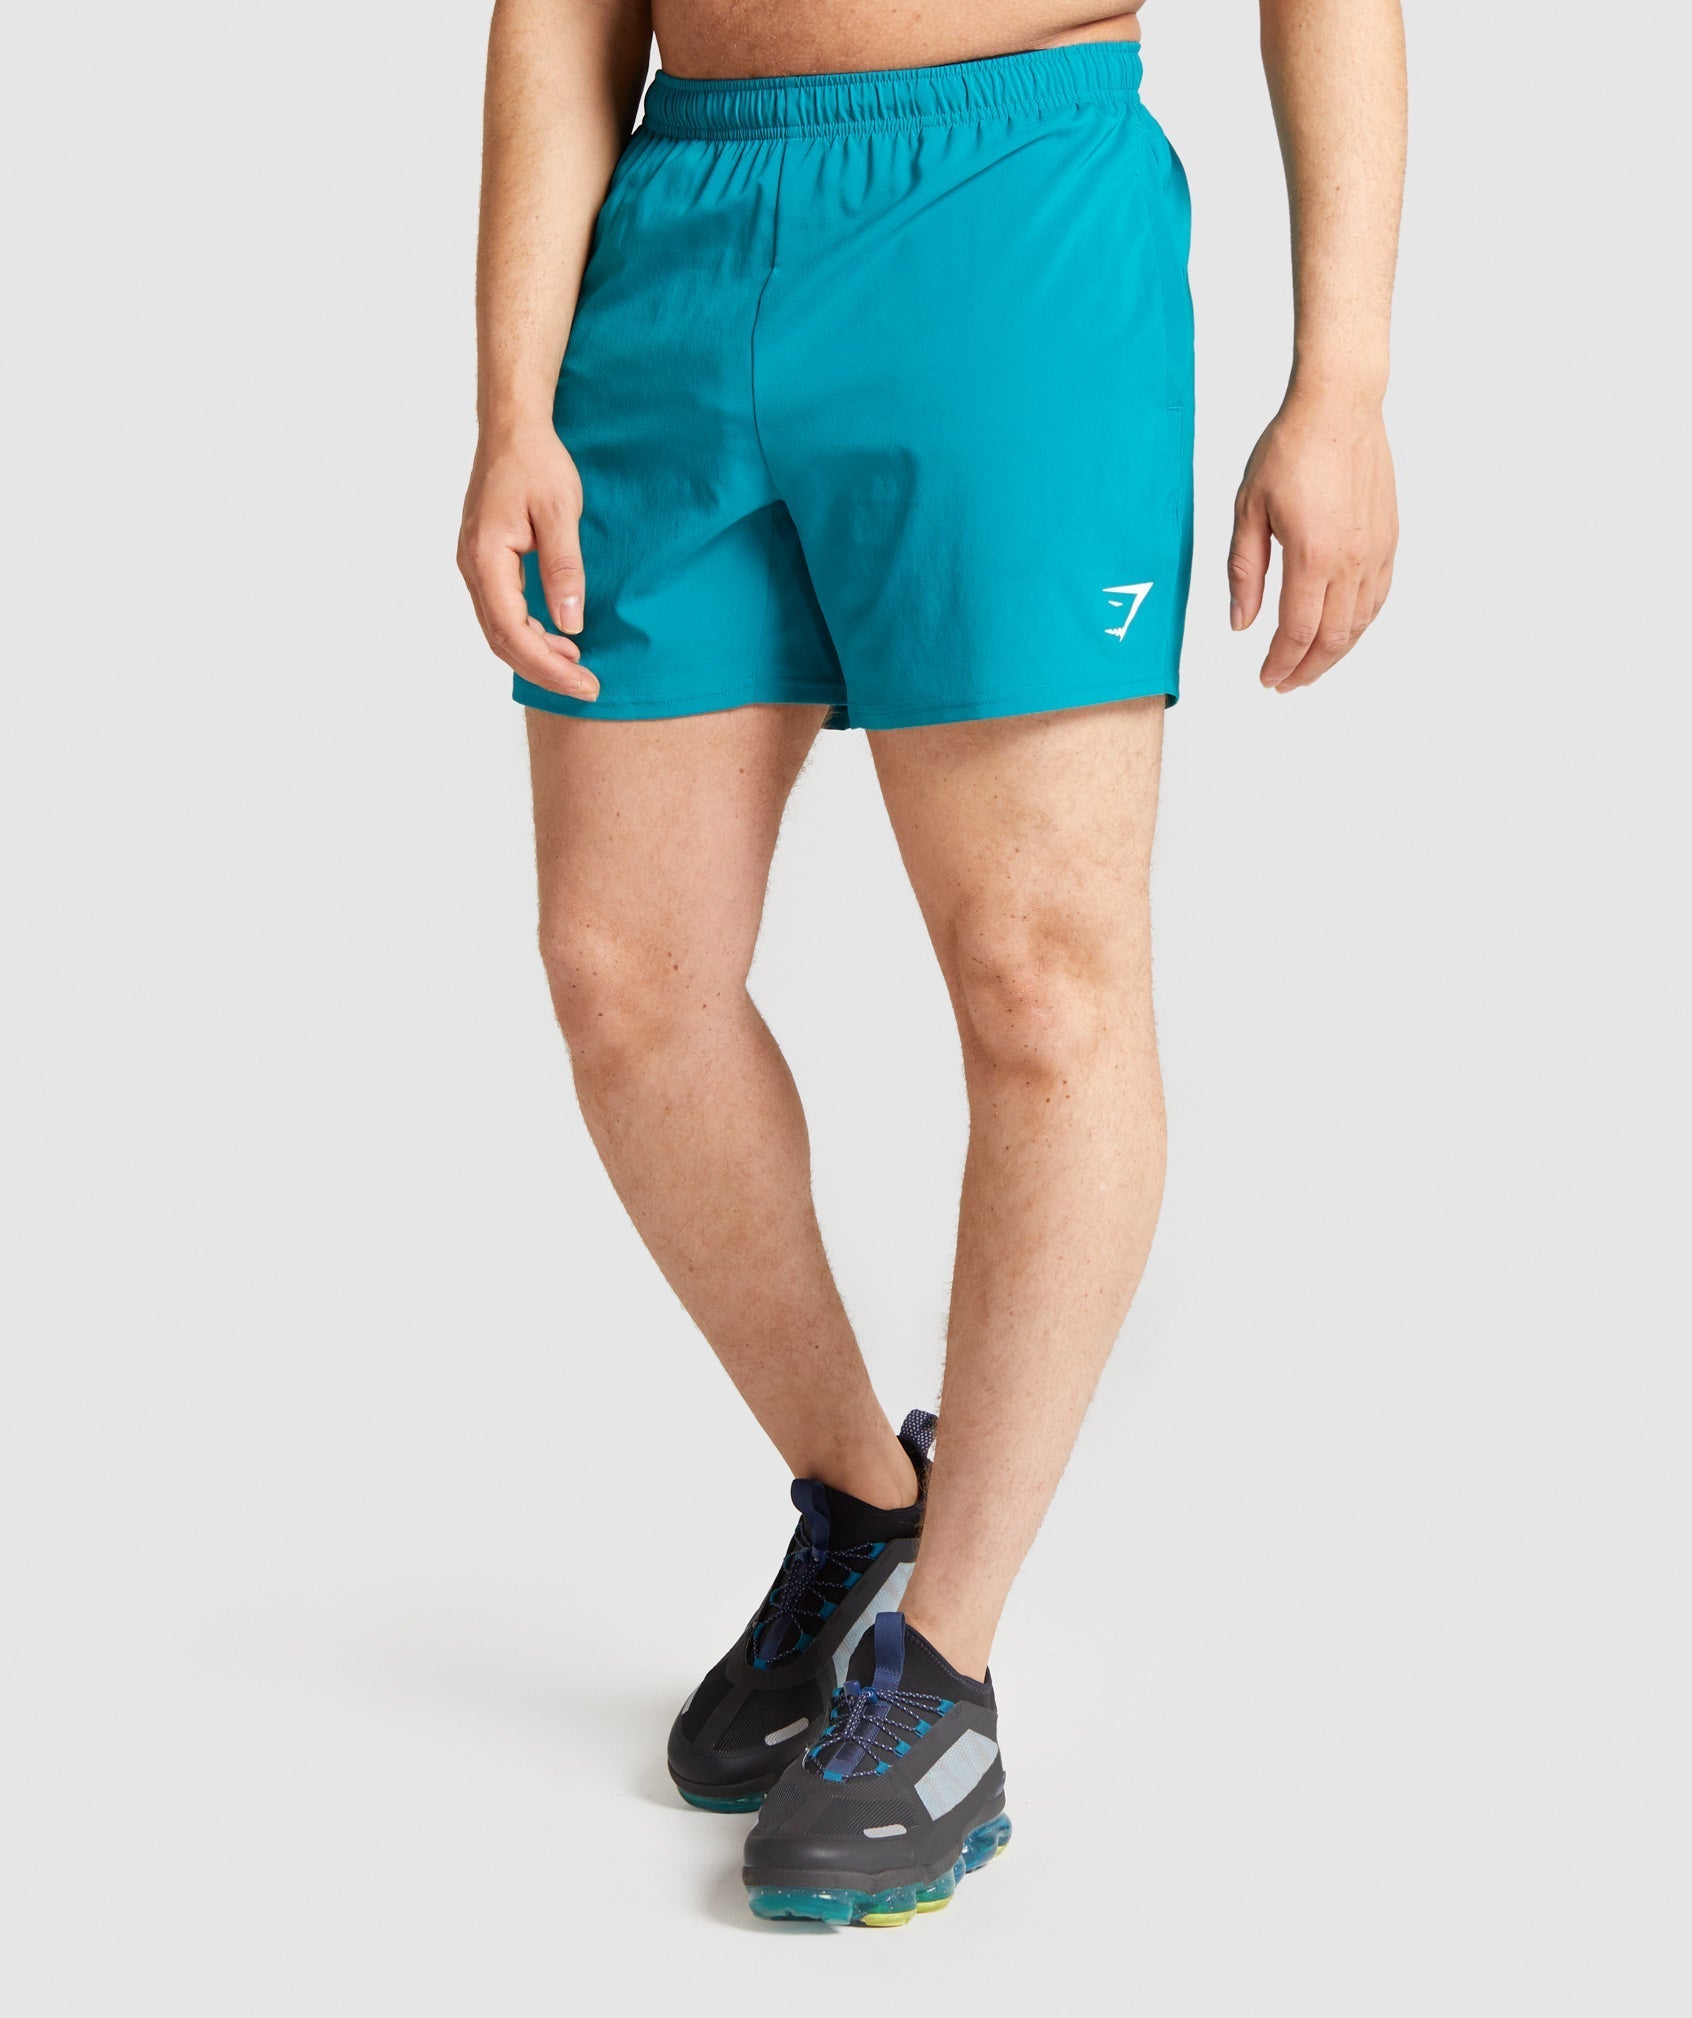 Gymshark Arrival 5 Shorts - Teal – Client 446 100K products